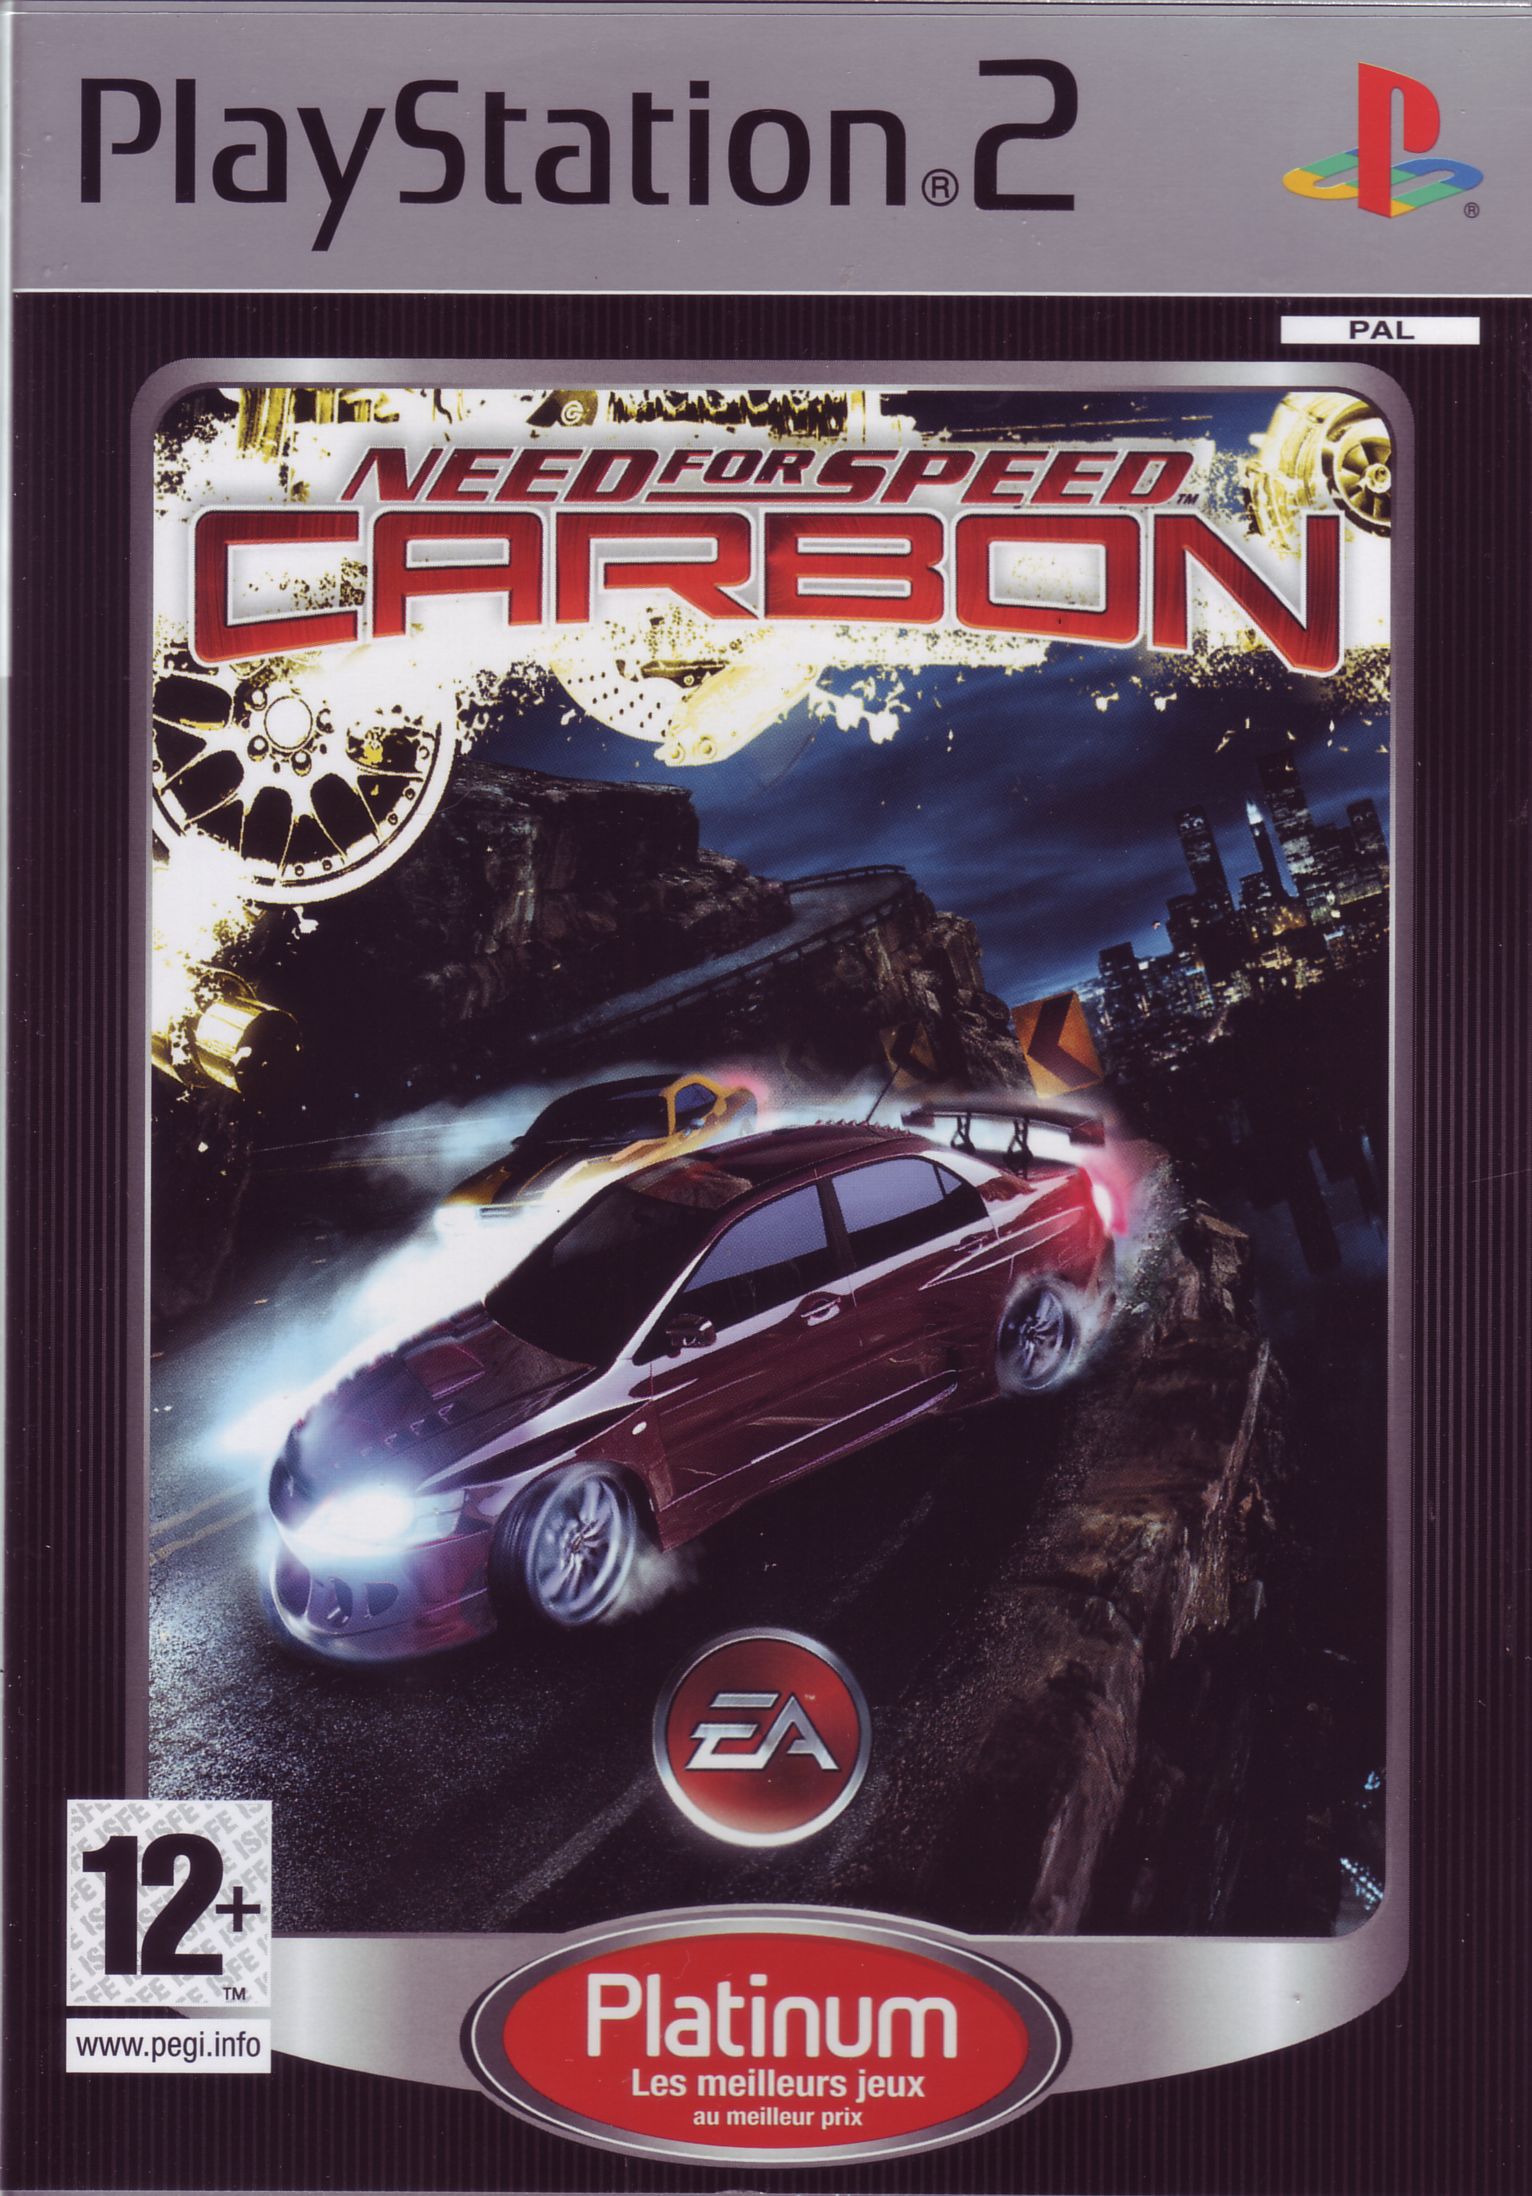 Need for speed carbon - Platinum